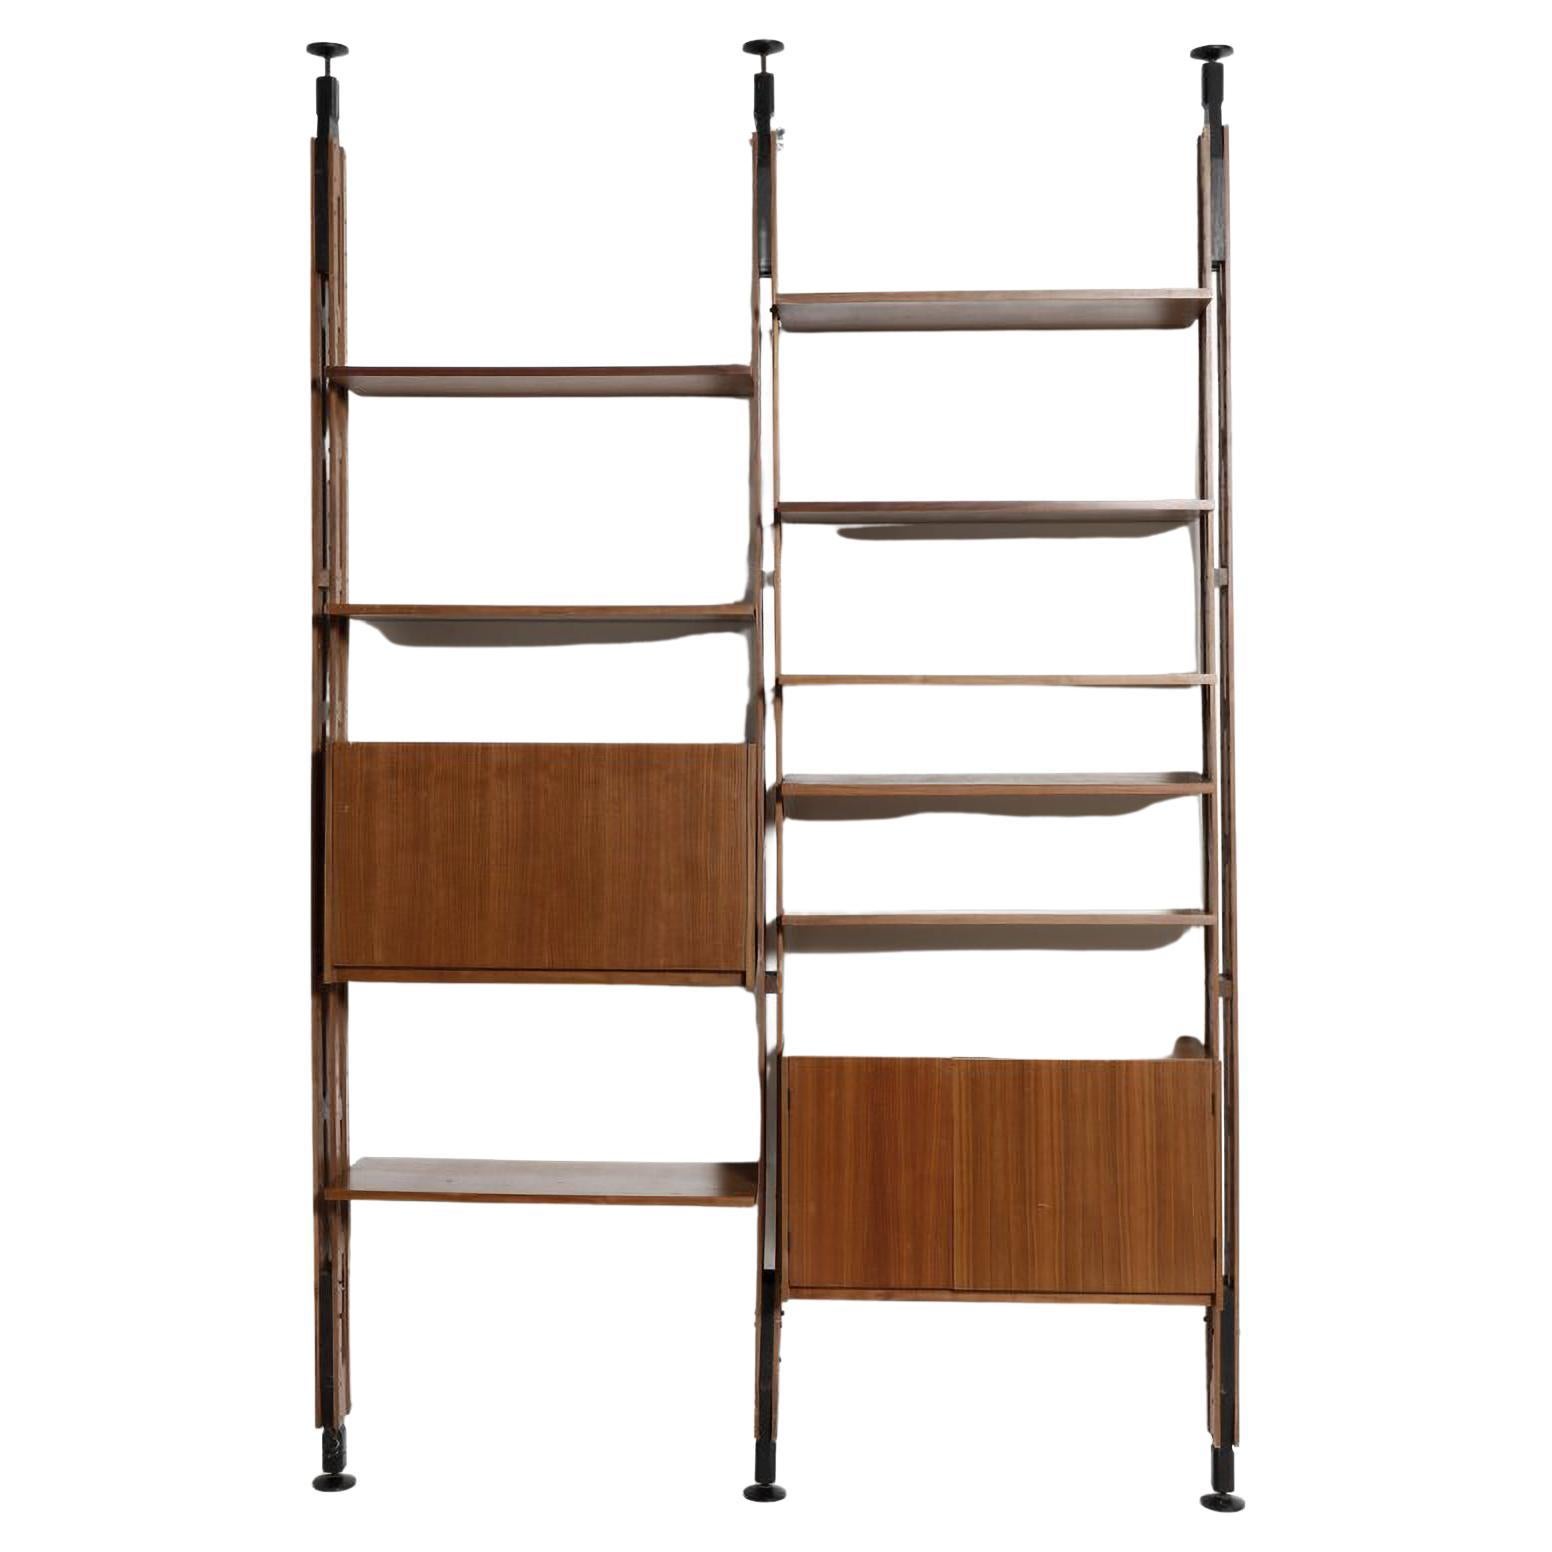 Giraffa bookcase by Paolo Tilche from Arform Mid-Century Modern Italy 60s. A beautiful example of the design of Paolo Tilche expresses the beautiful realization of this Giraffa Bookcase that possesses charm, stylistic rigor, rationality and quality,